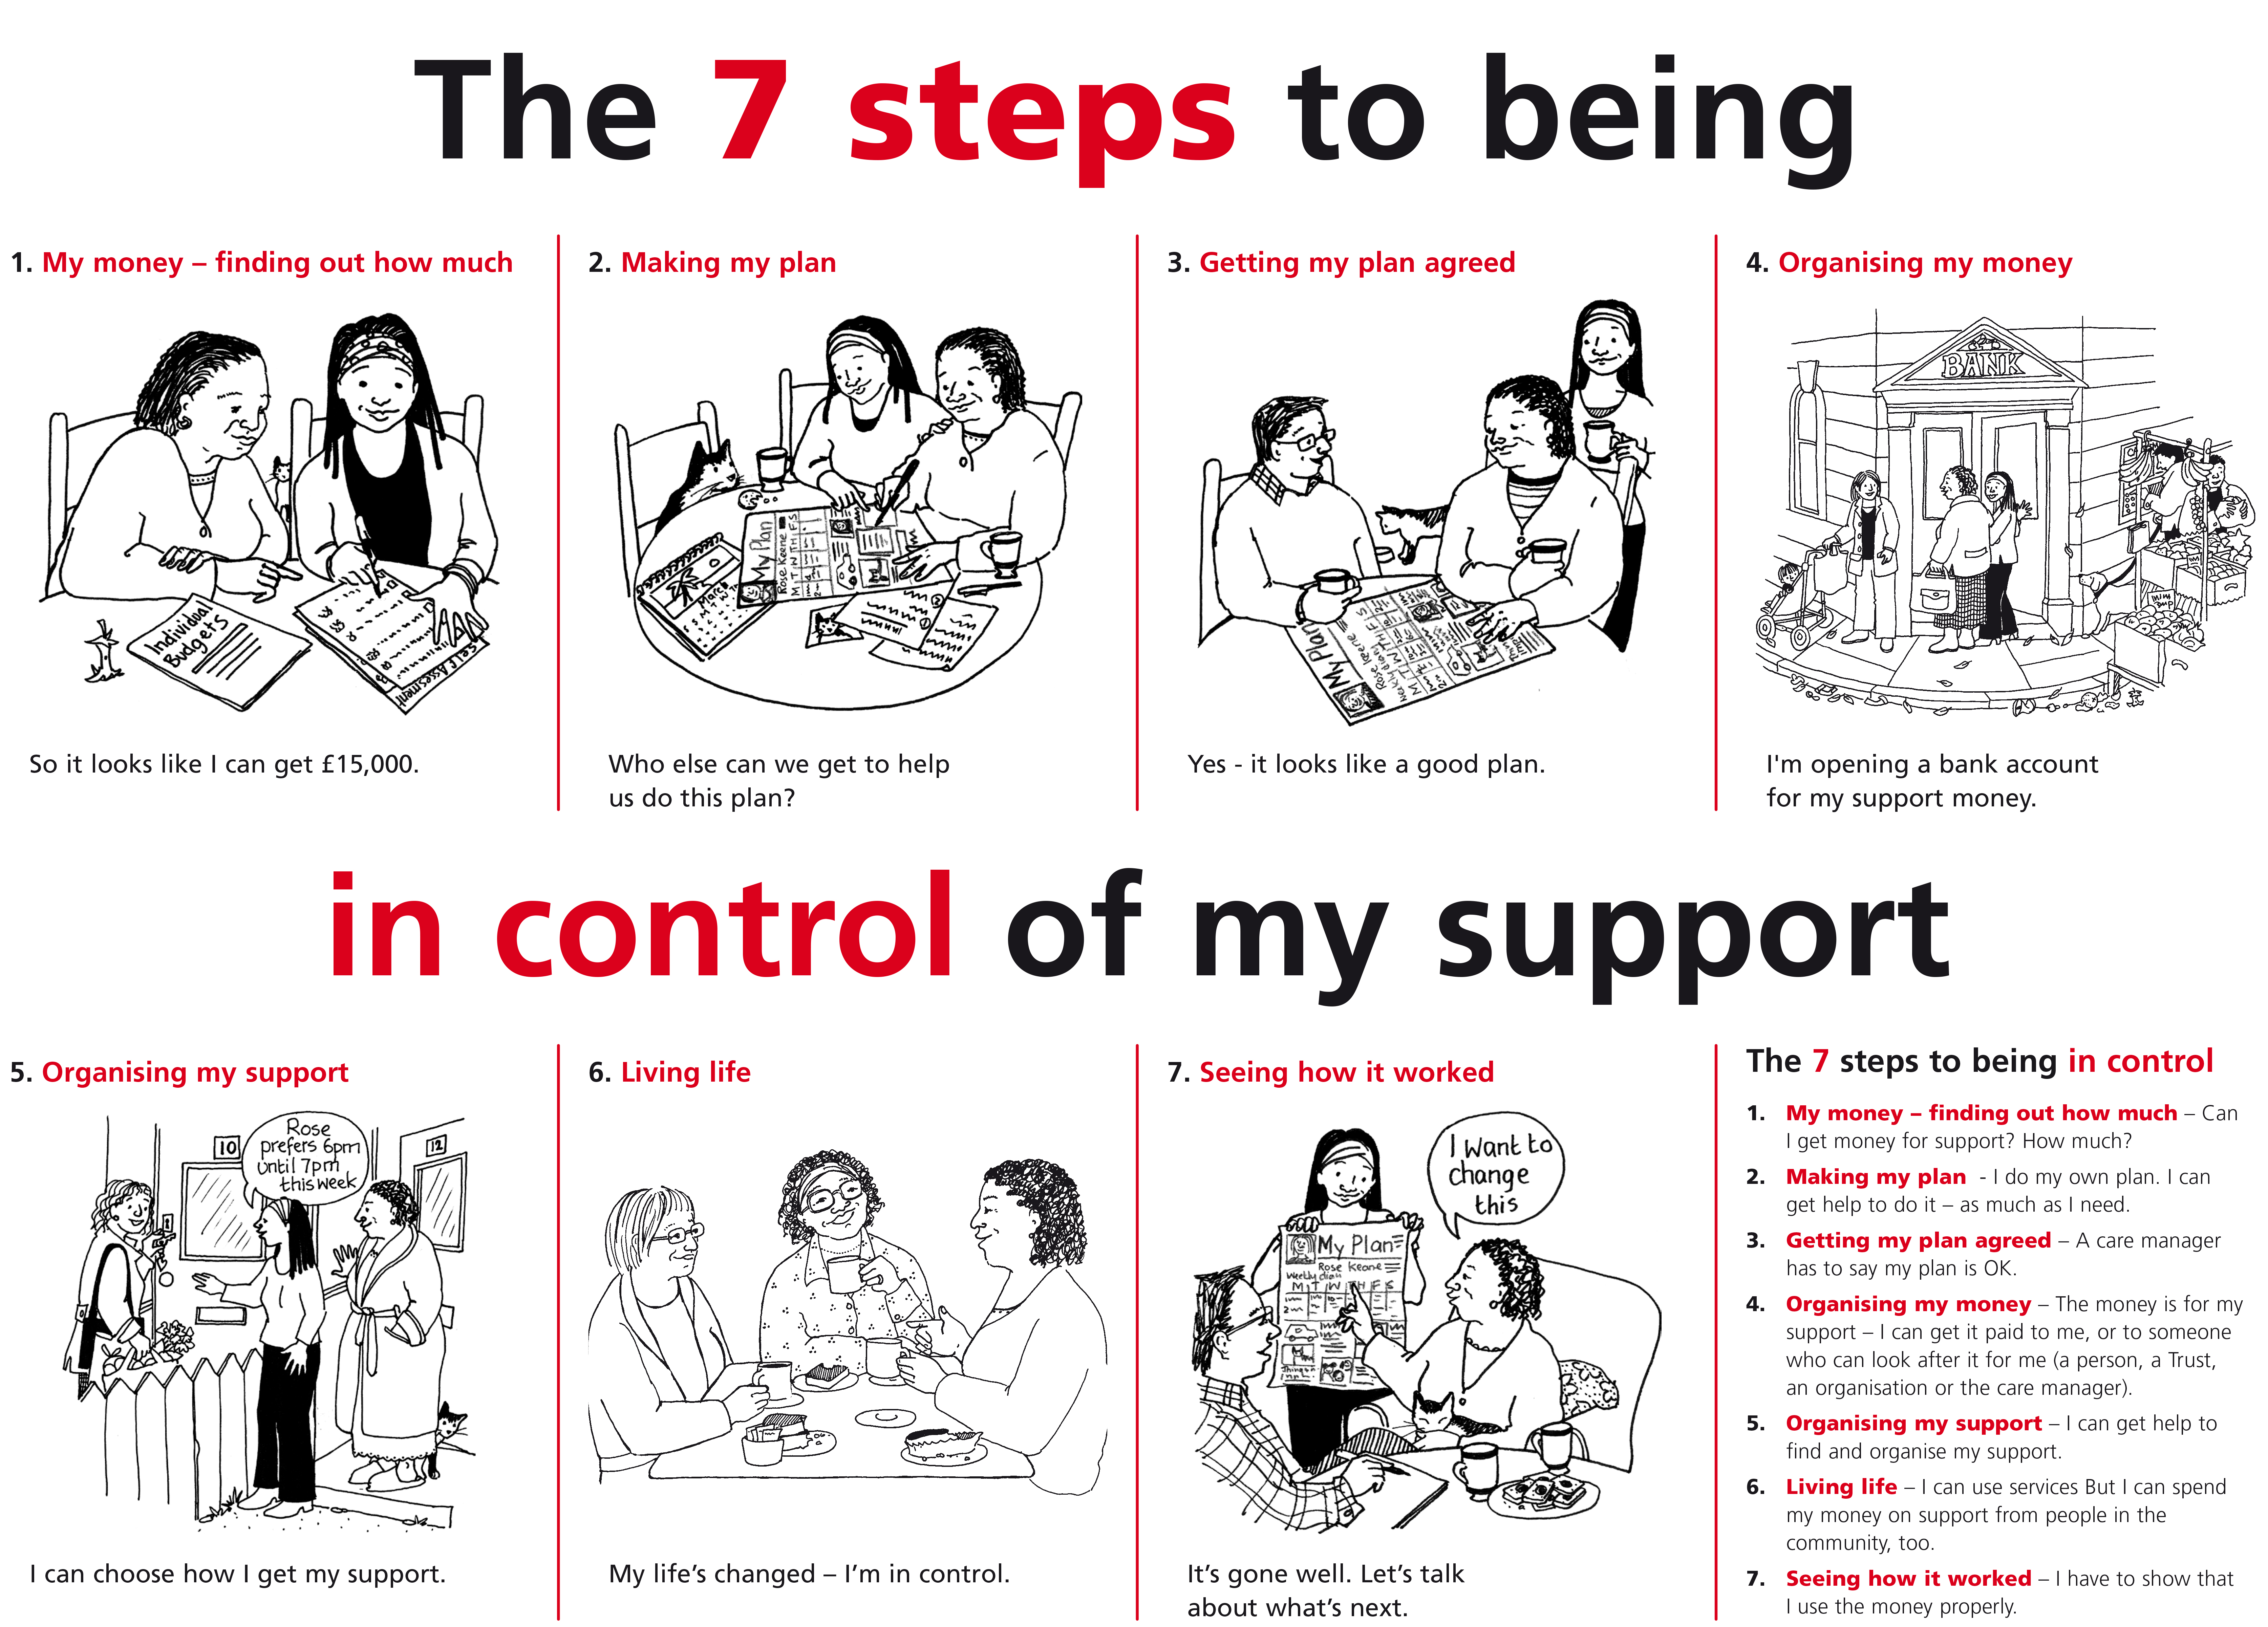 The 7 steps to being in control of my support